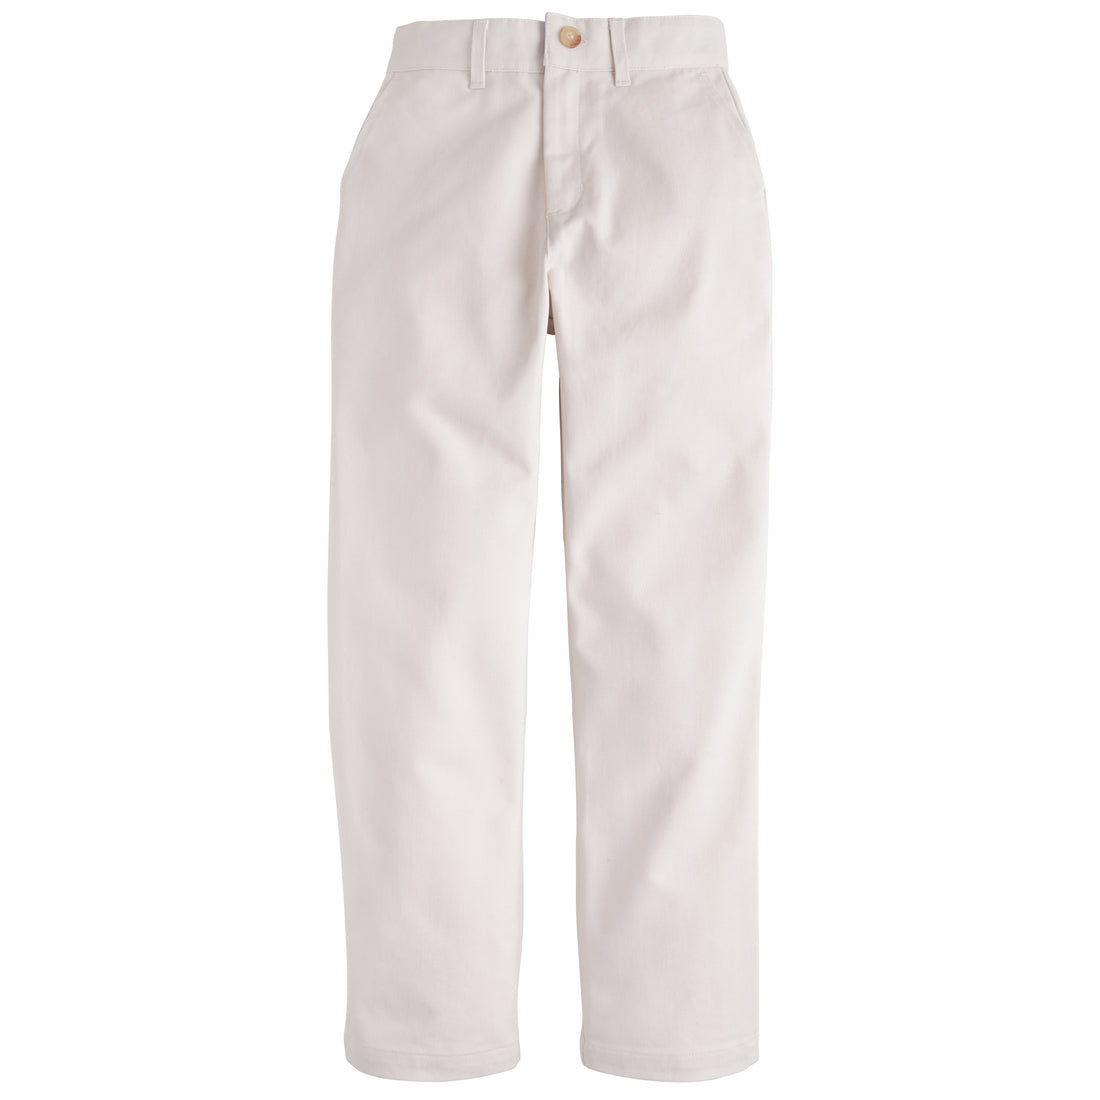 Little English classic pant for boys, faux button closure with zipper and interior elastic adjuster, khaki twill pant with belt loops for older boys